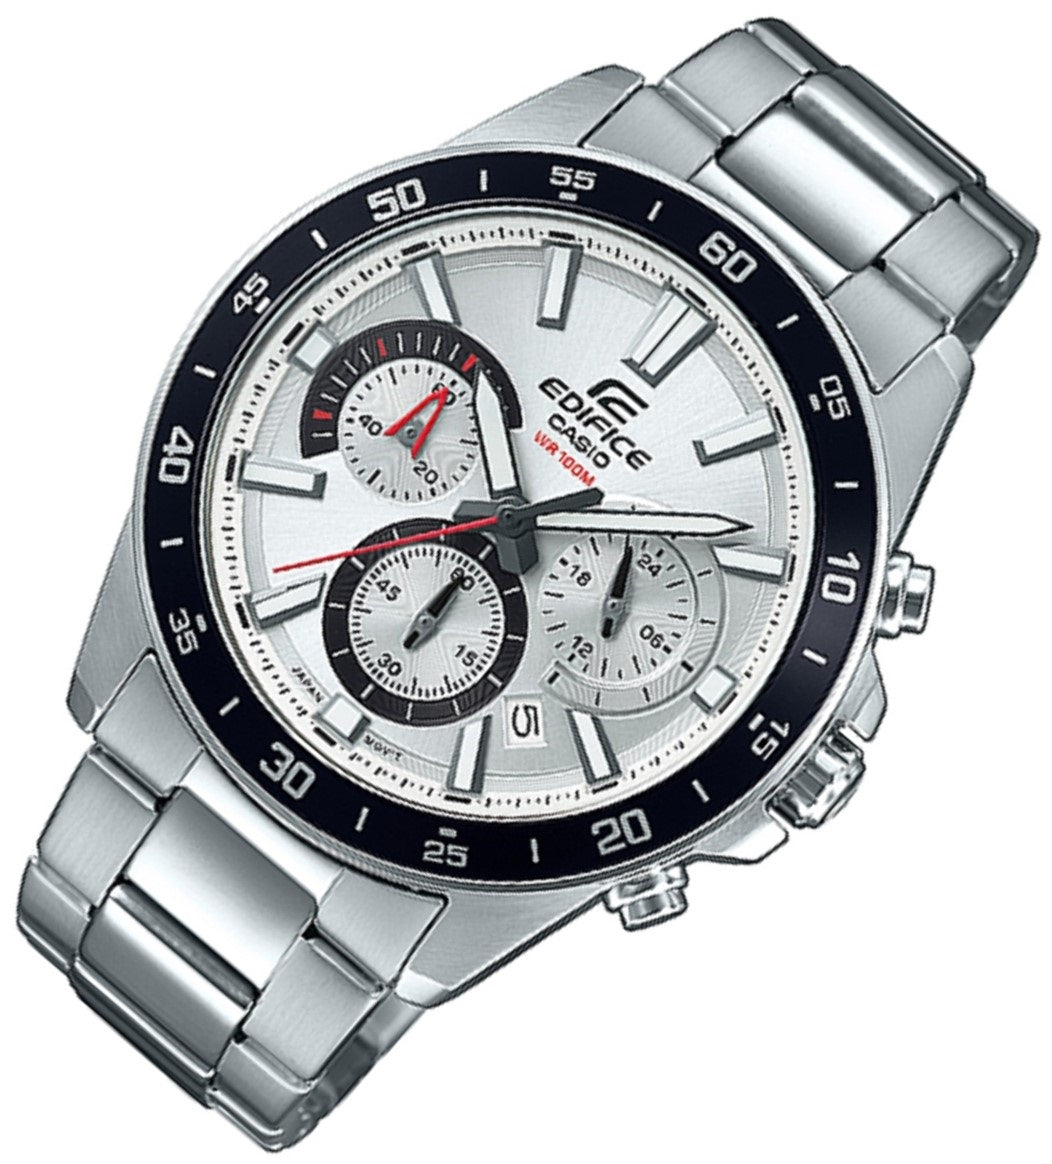 Casio Edifice EFV-570D-7A Chronograph Stainless Steel Strap Watch For Men-Watch Portal Philippines